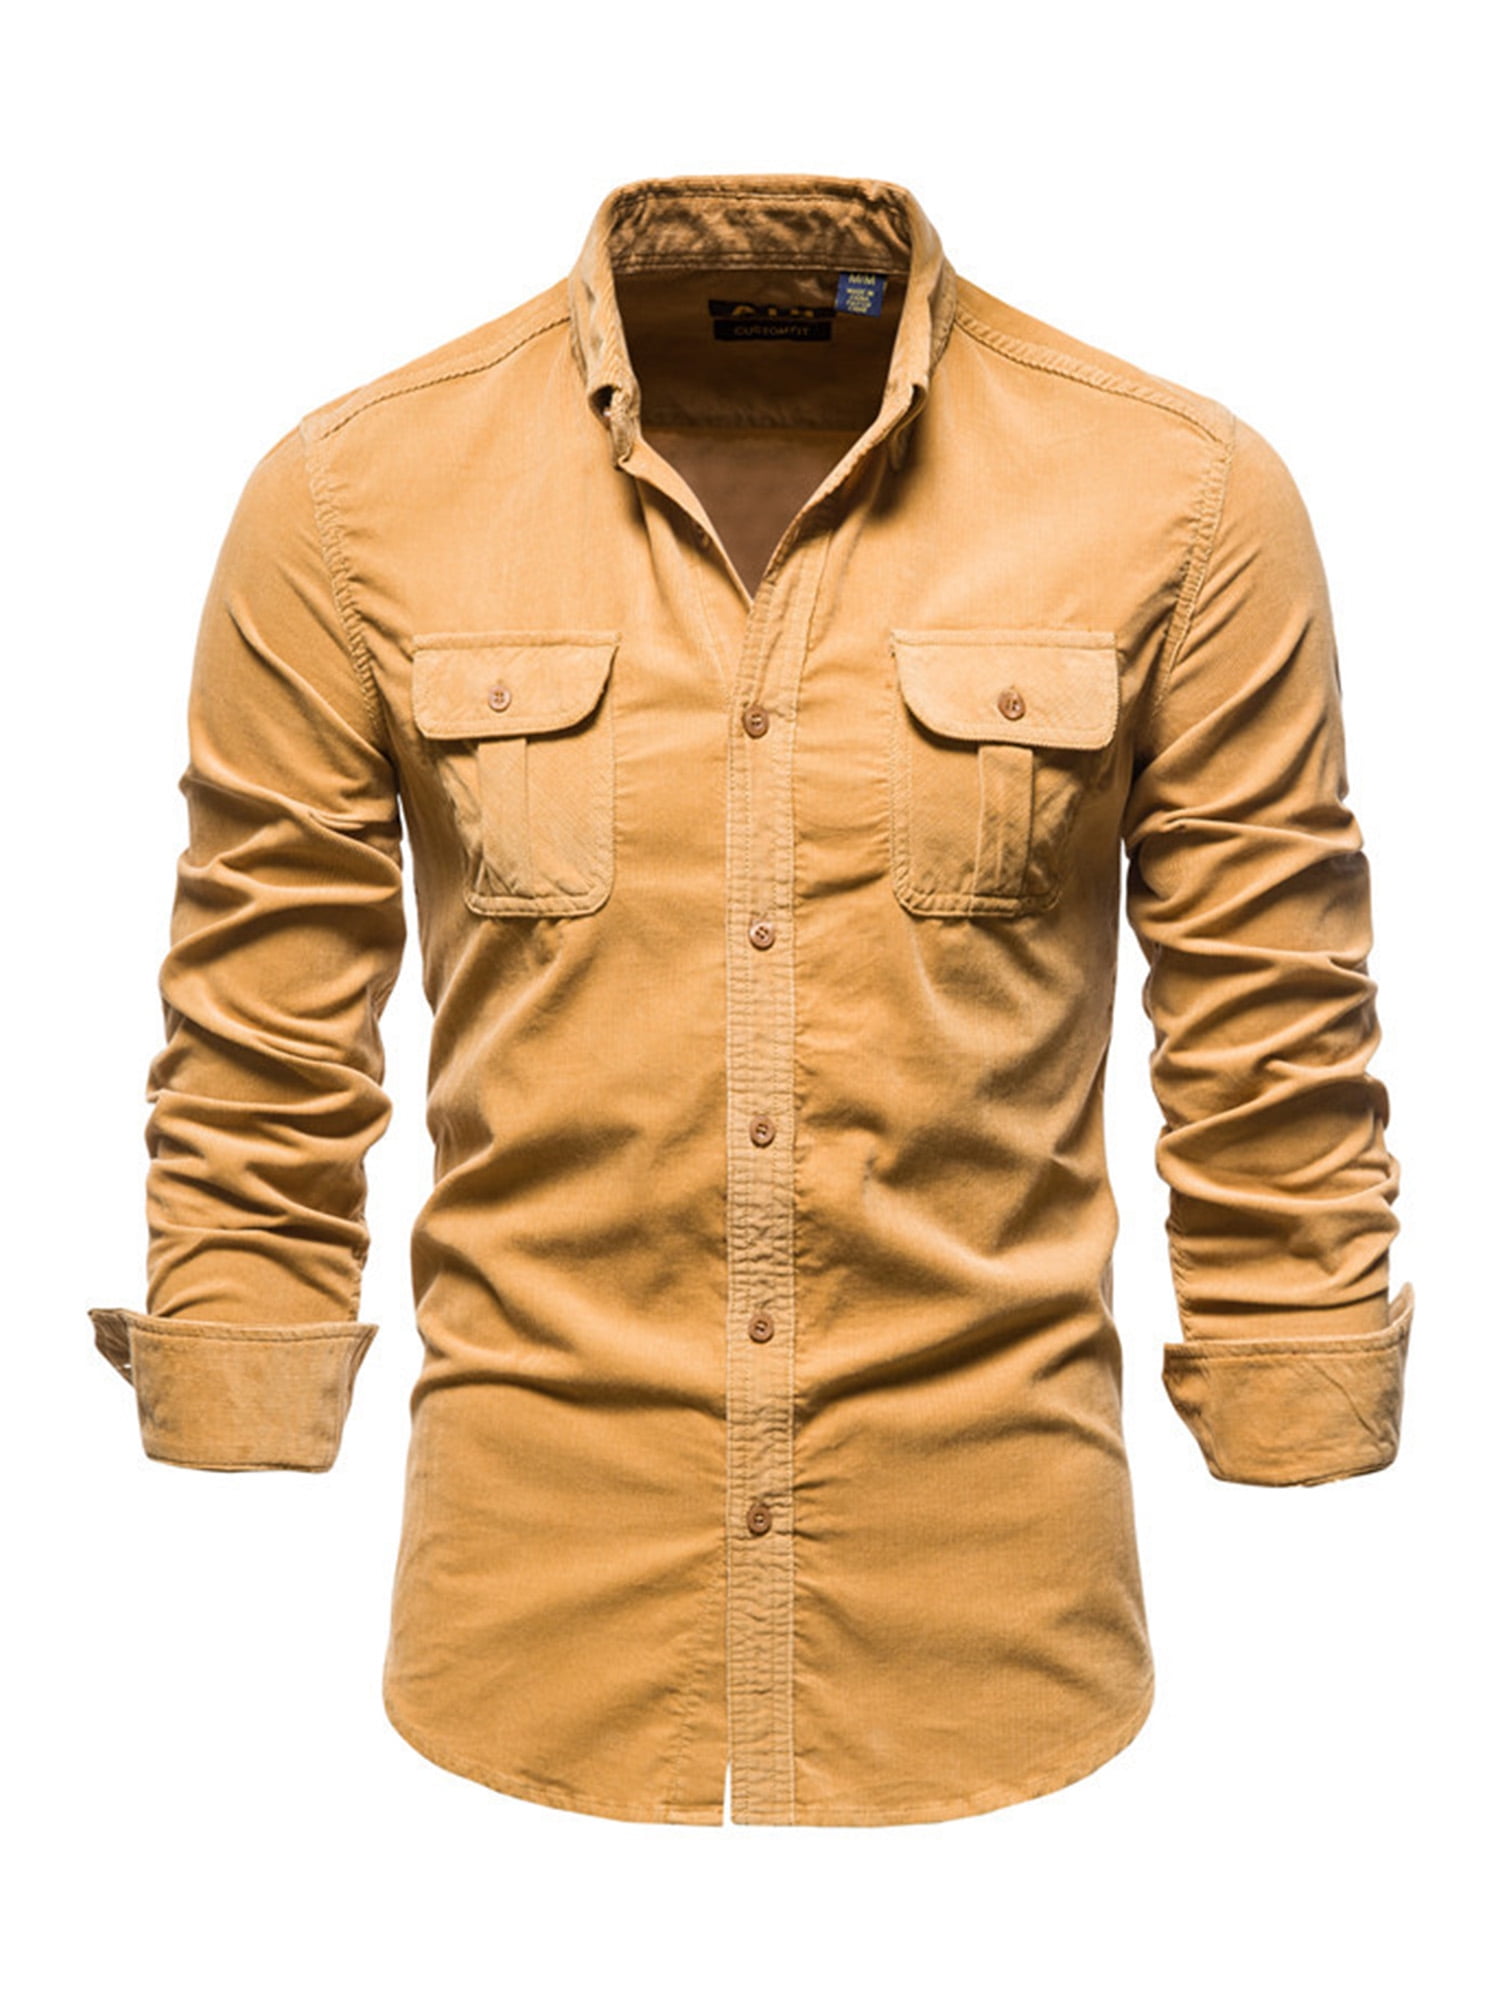 Men's Long Sleeve Patchwork Cargo Shirt Casual Button Down Slim Fit Formal Tops